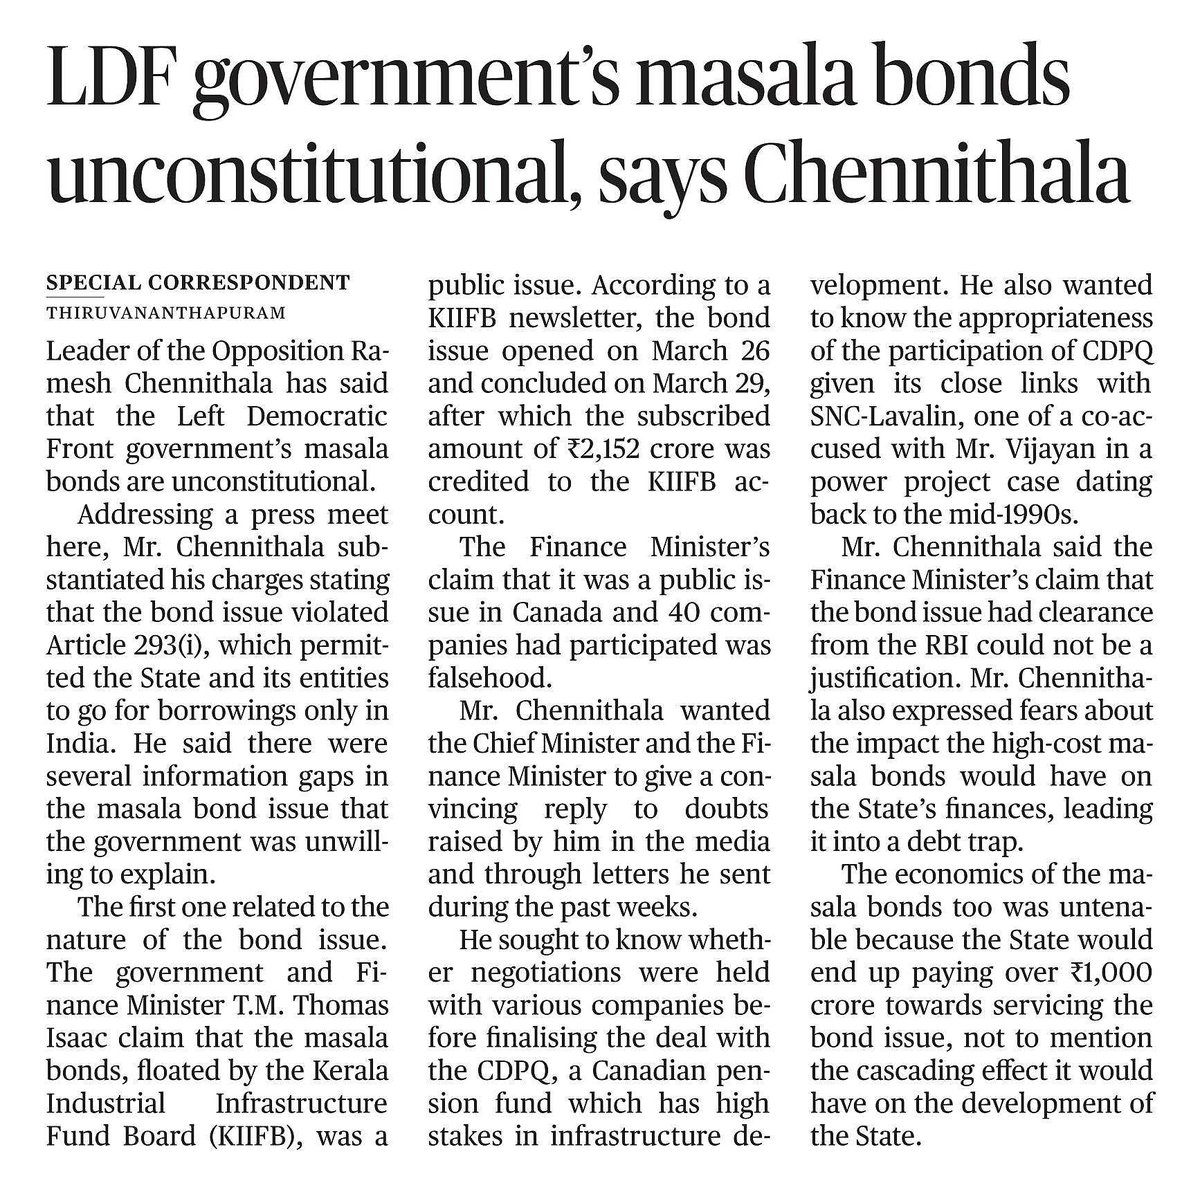 LDF government’s #masalabonds unconstitutional, says @chennithala